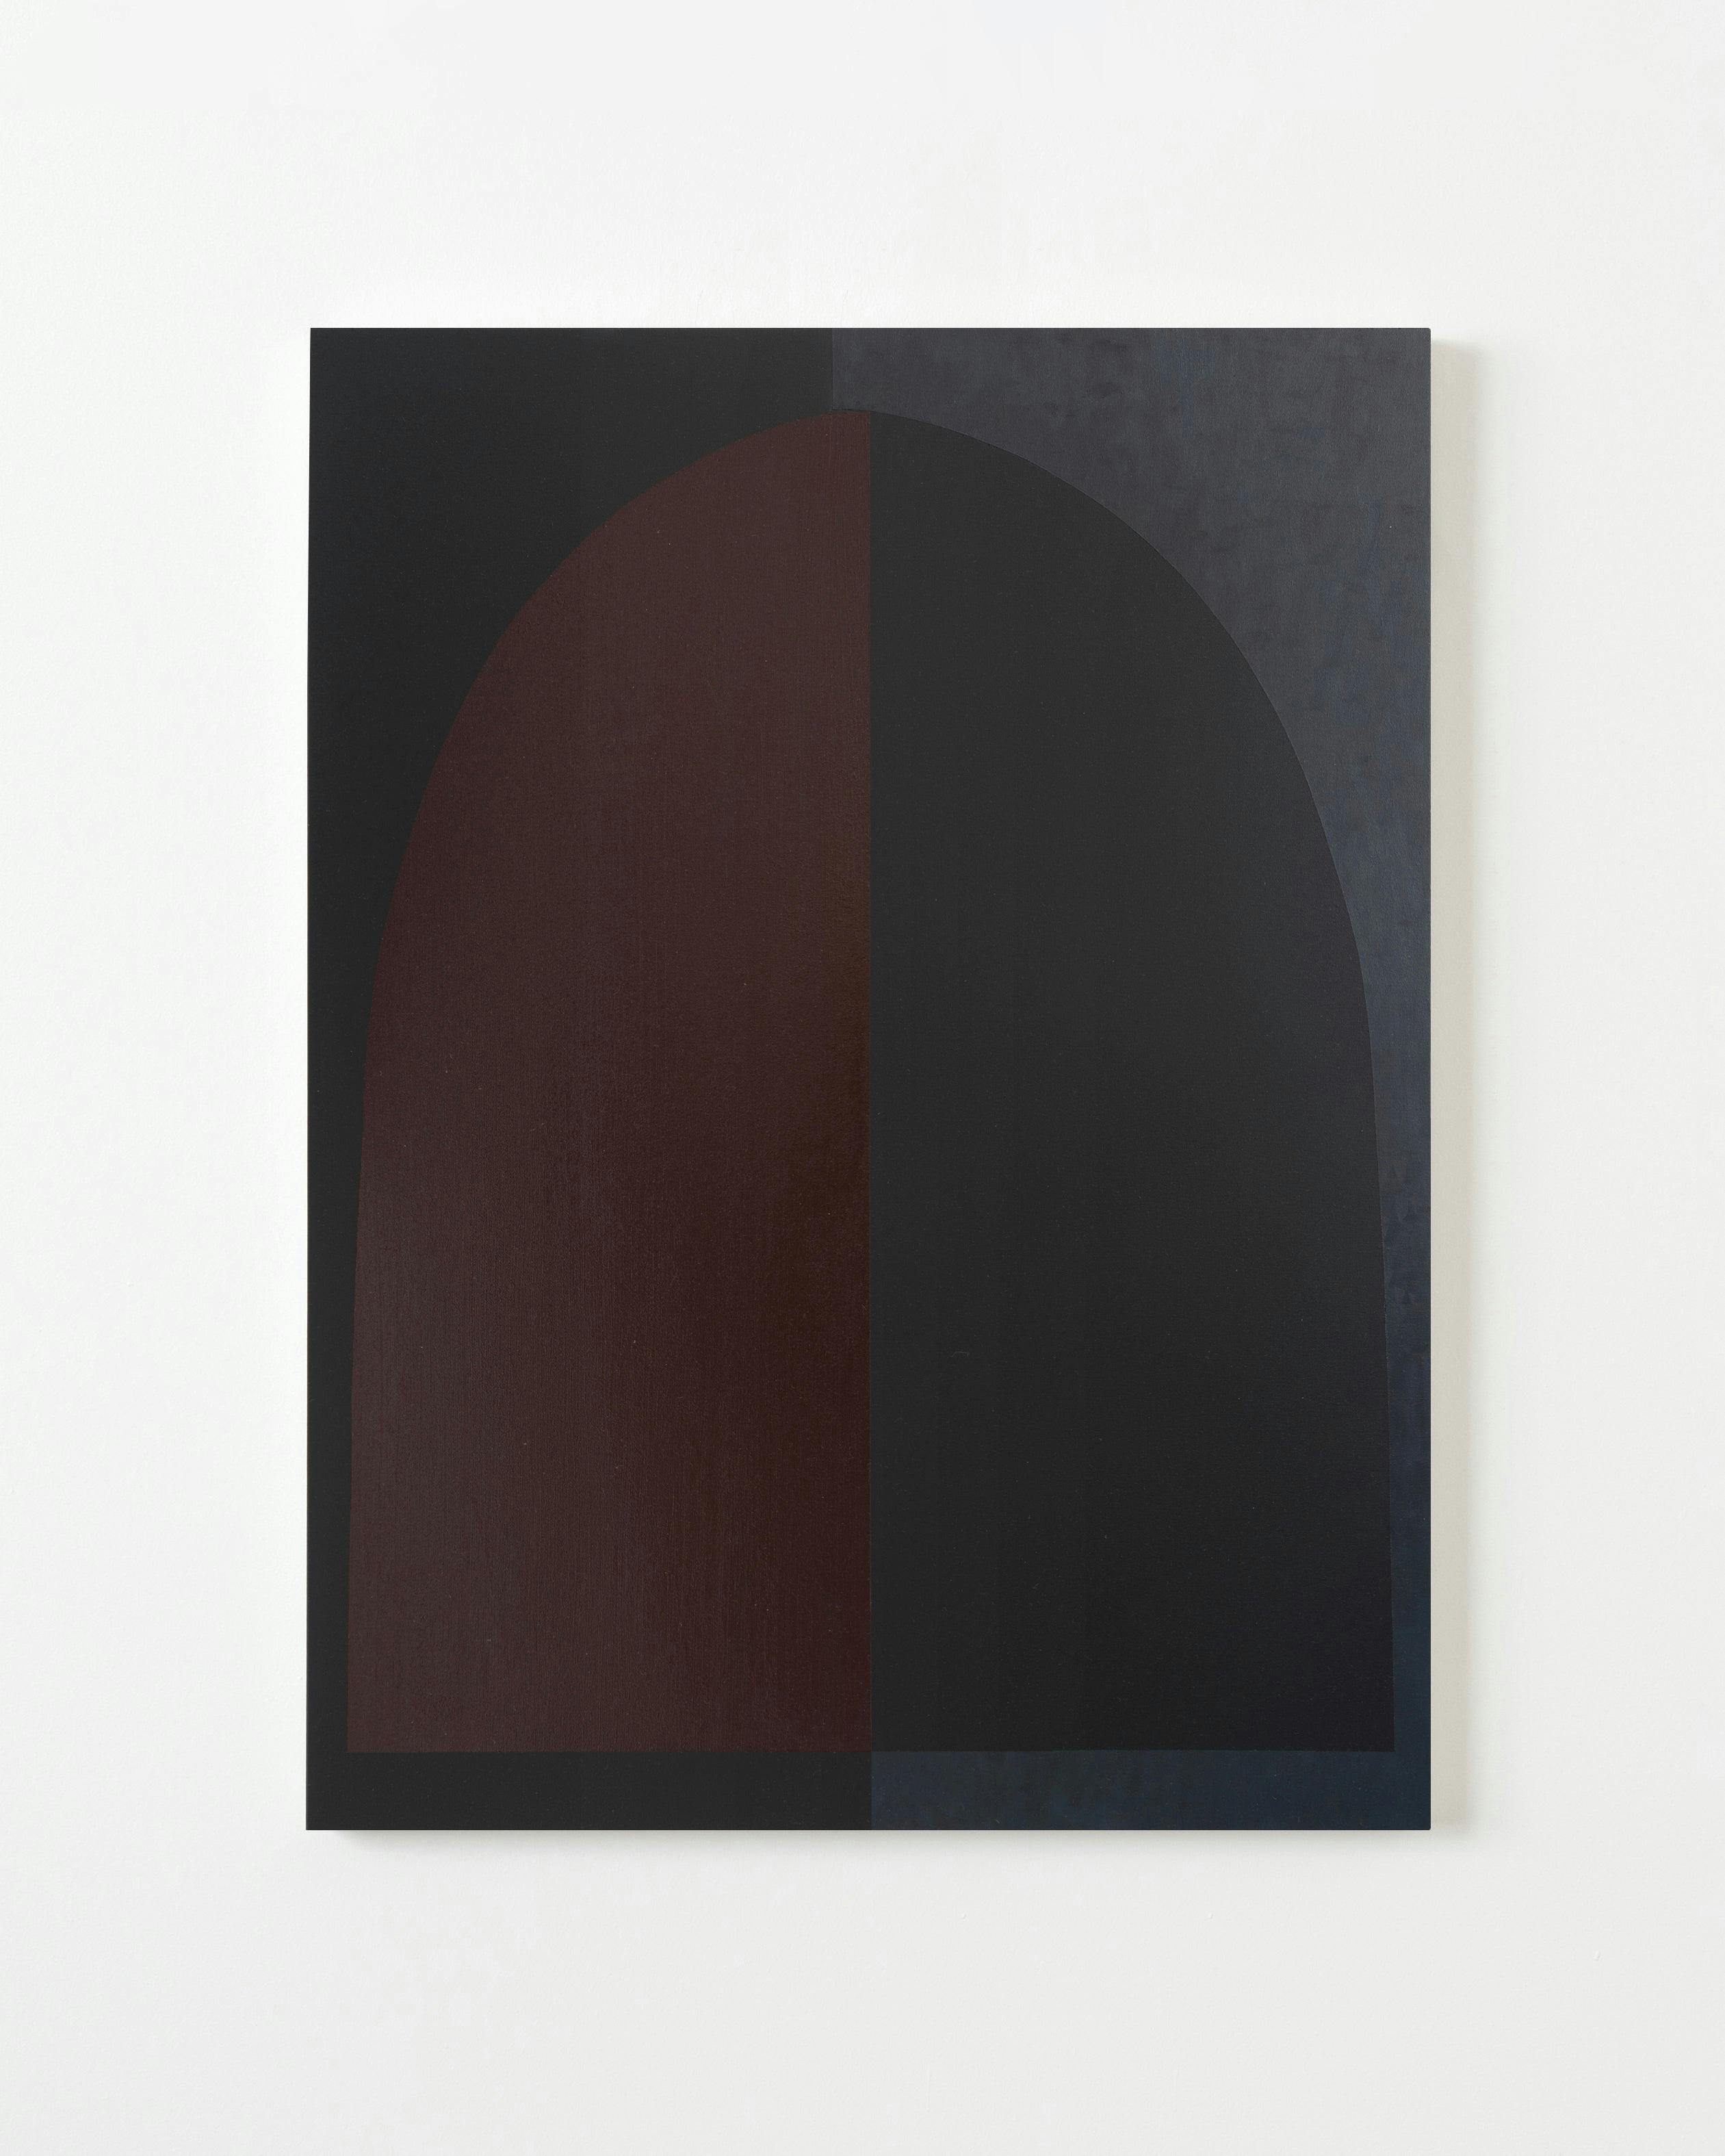 Painting by Aschely Vaughan Cone titled "Grey Arch at Night in Red Light I".